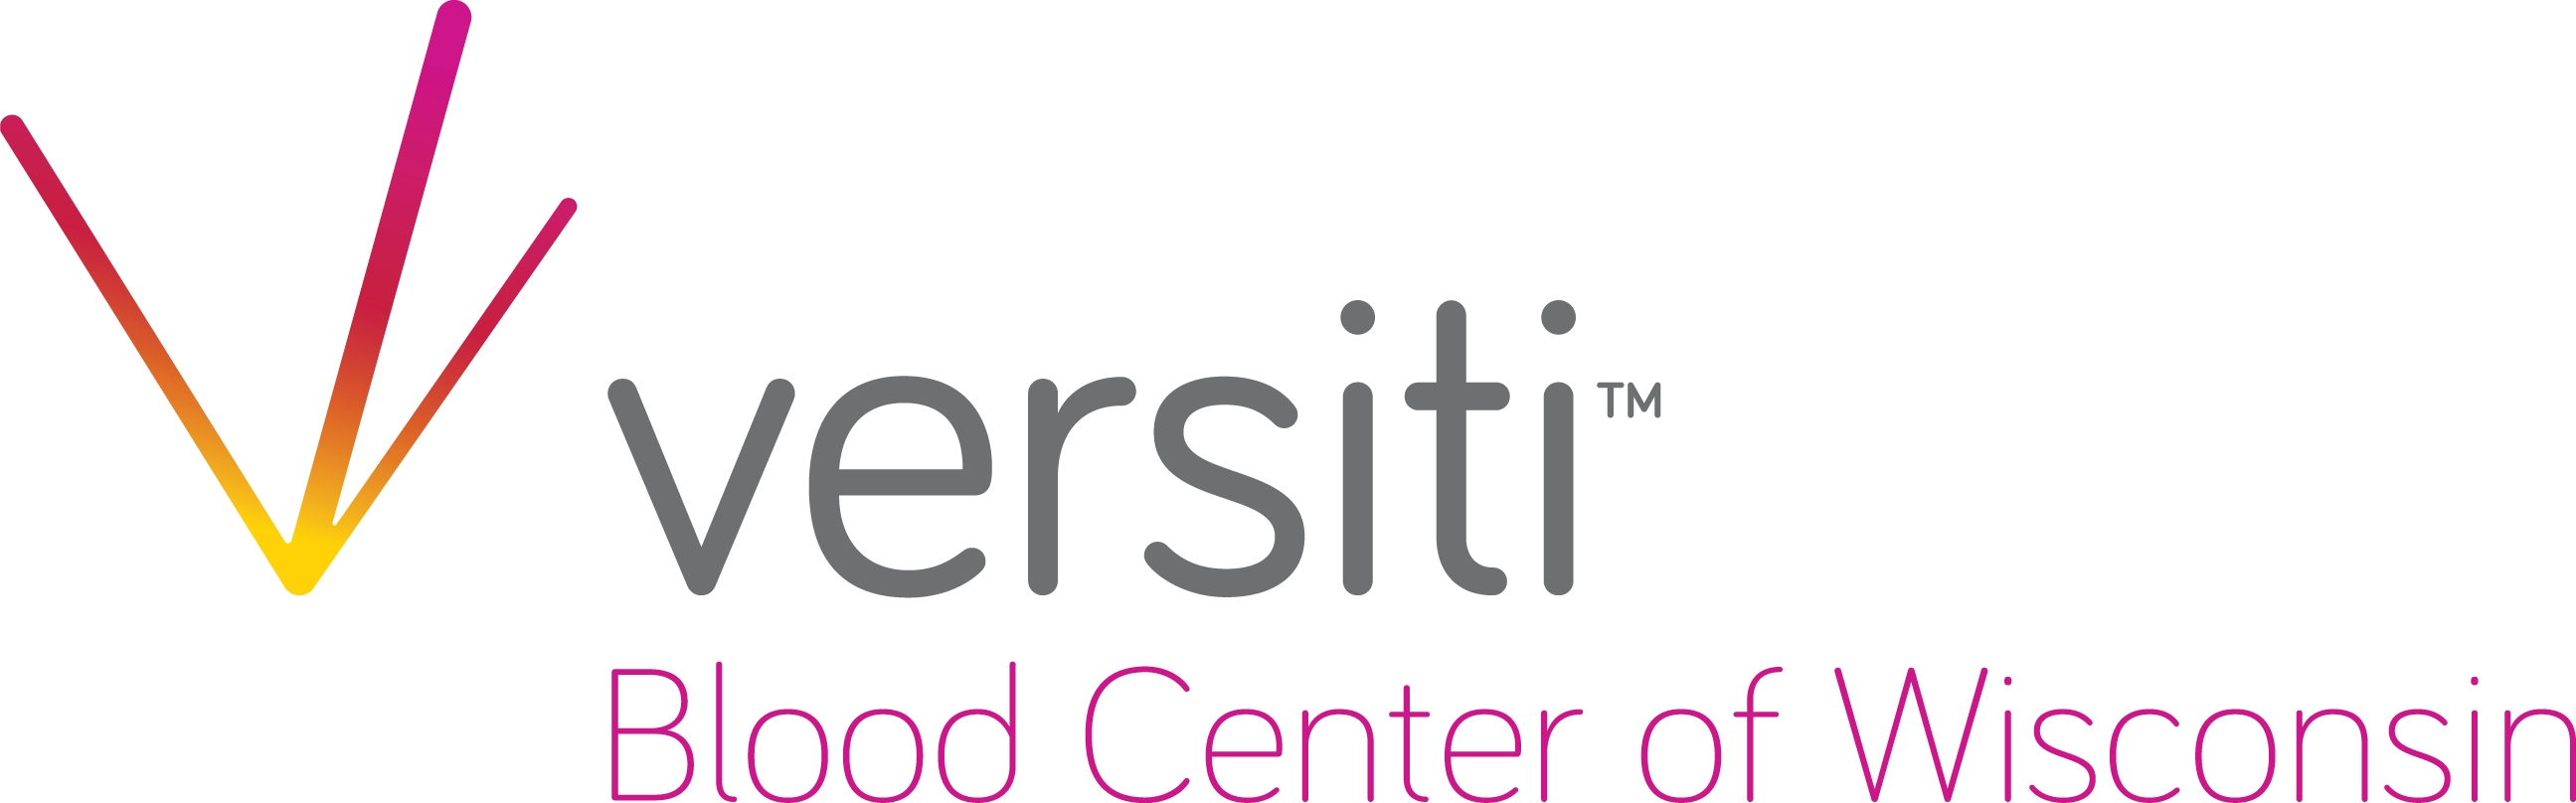 Versiti Blood Center of Wisconsin hosts Sickle Cell Saturday Blood Drives in Milwaukee’s African American Communities